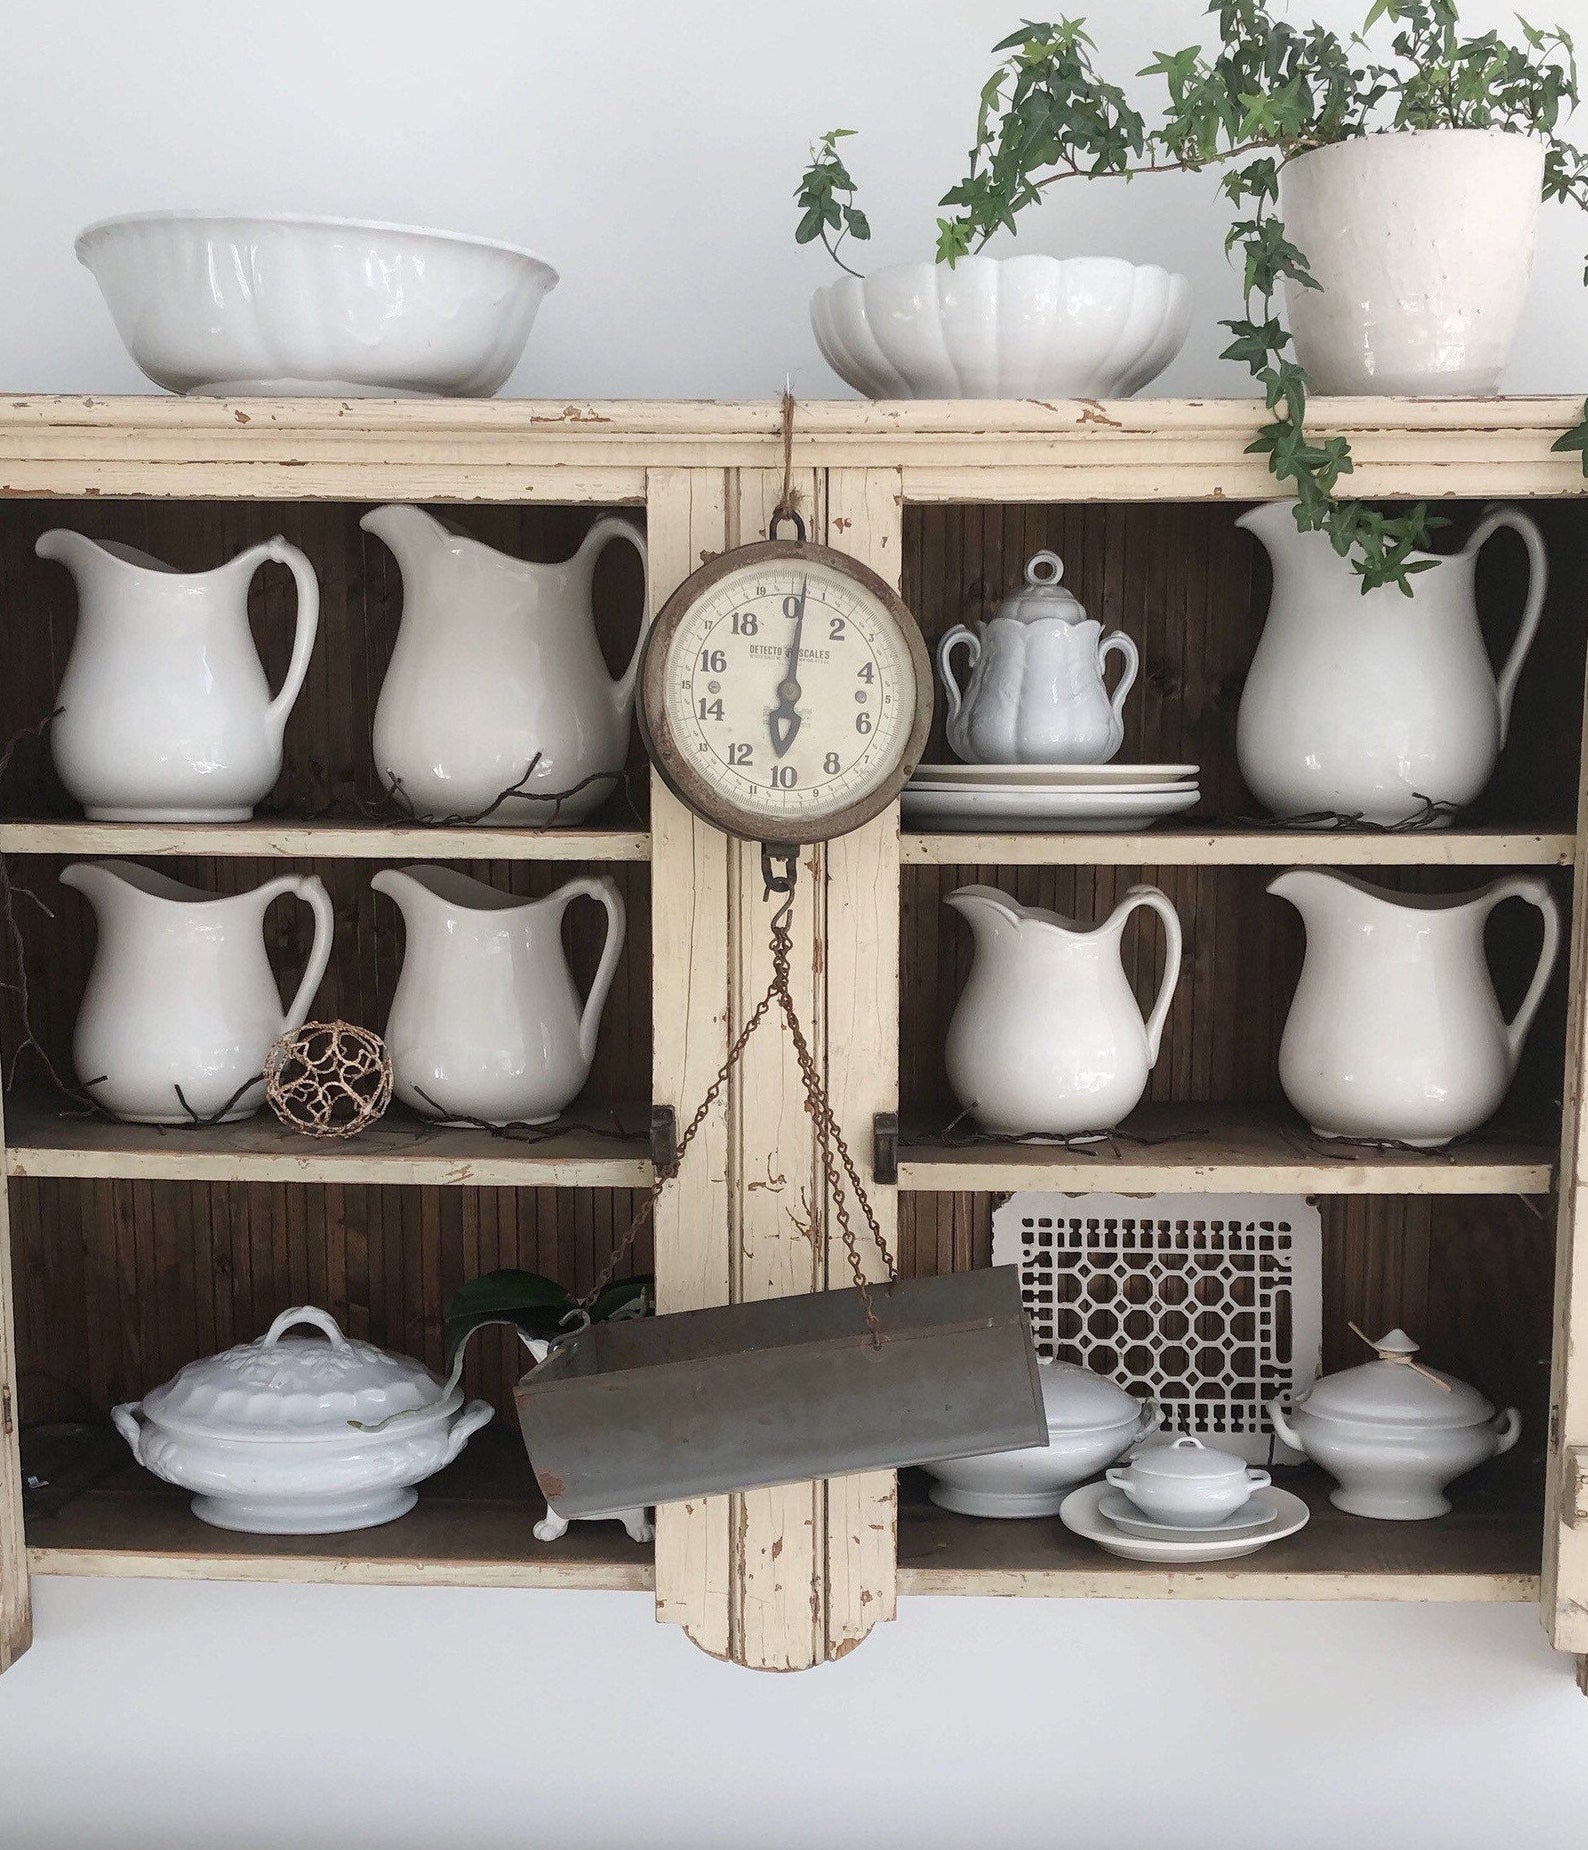 Ironstone pitcher collection in a vintage hutch cabinet